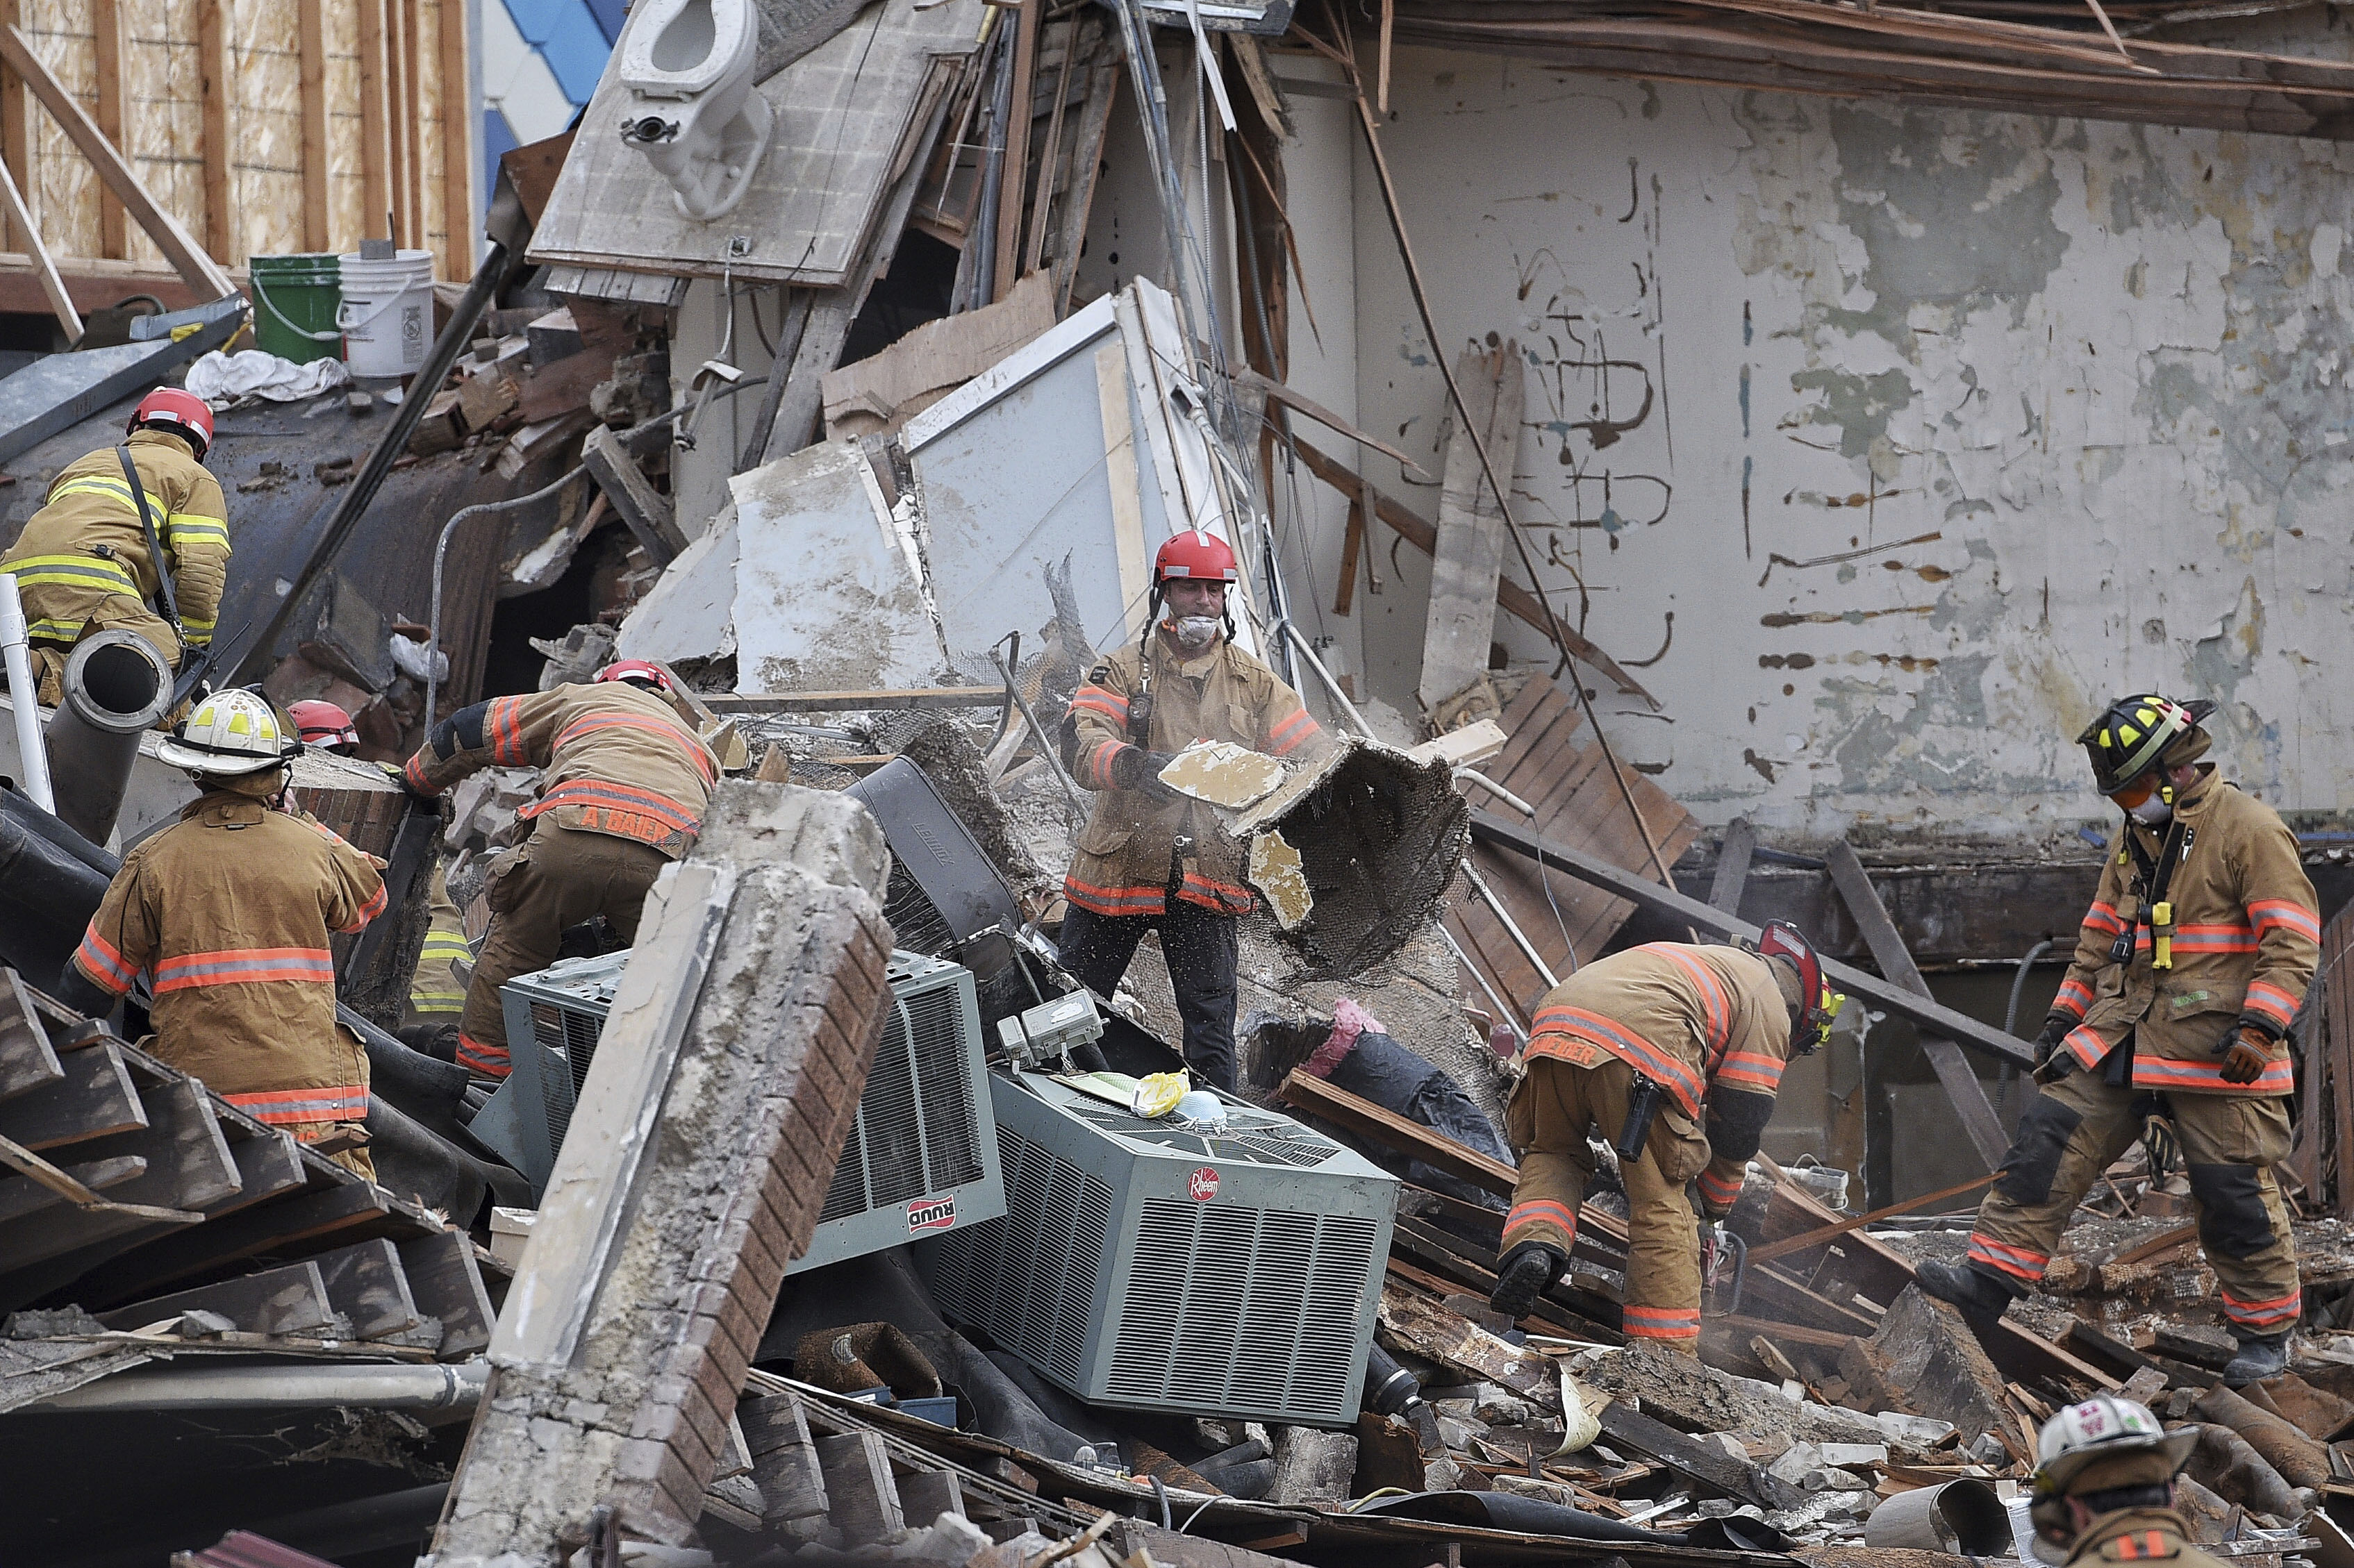 Emergency crews clear debris at the scene of building collapse in Sioux Falls, S.D., Dec. 2, 2016. (Joe Ahlquist—The Argus Leader/AP)